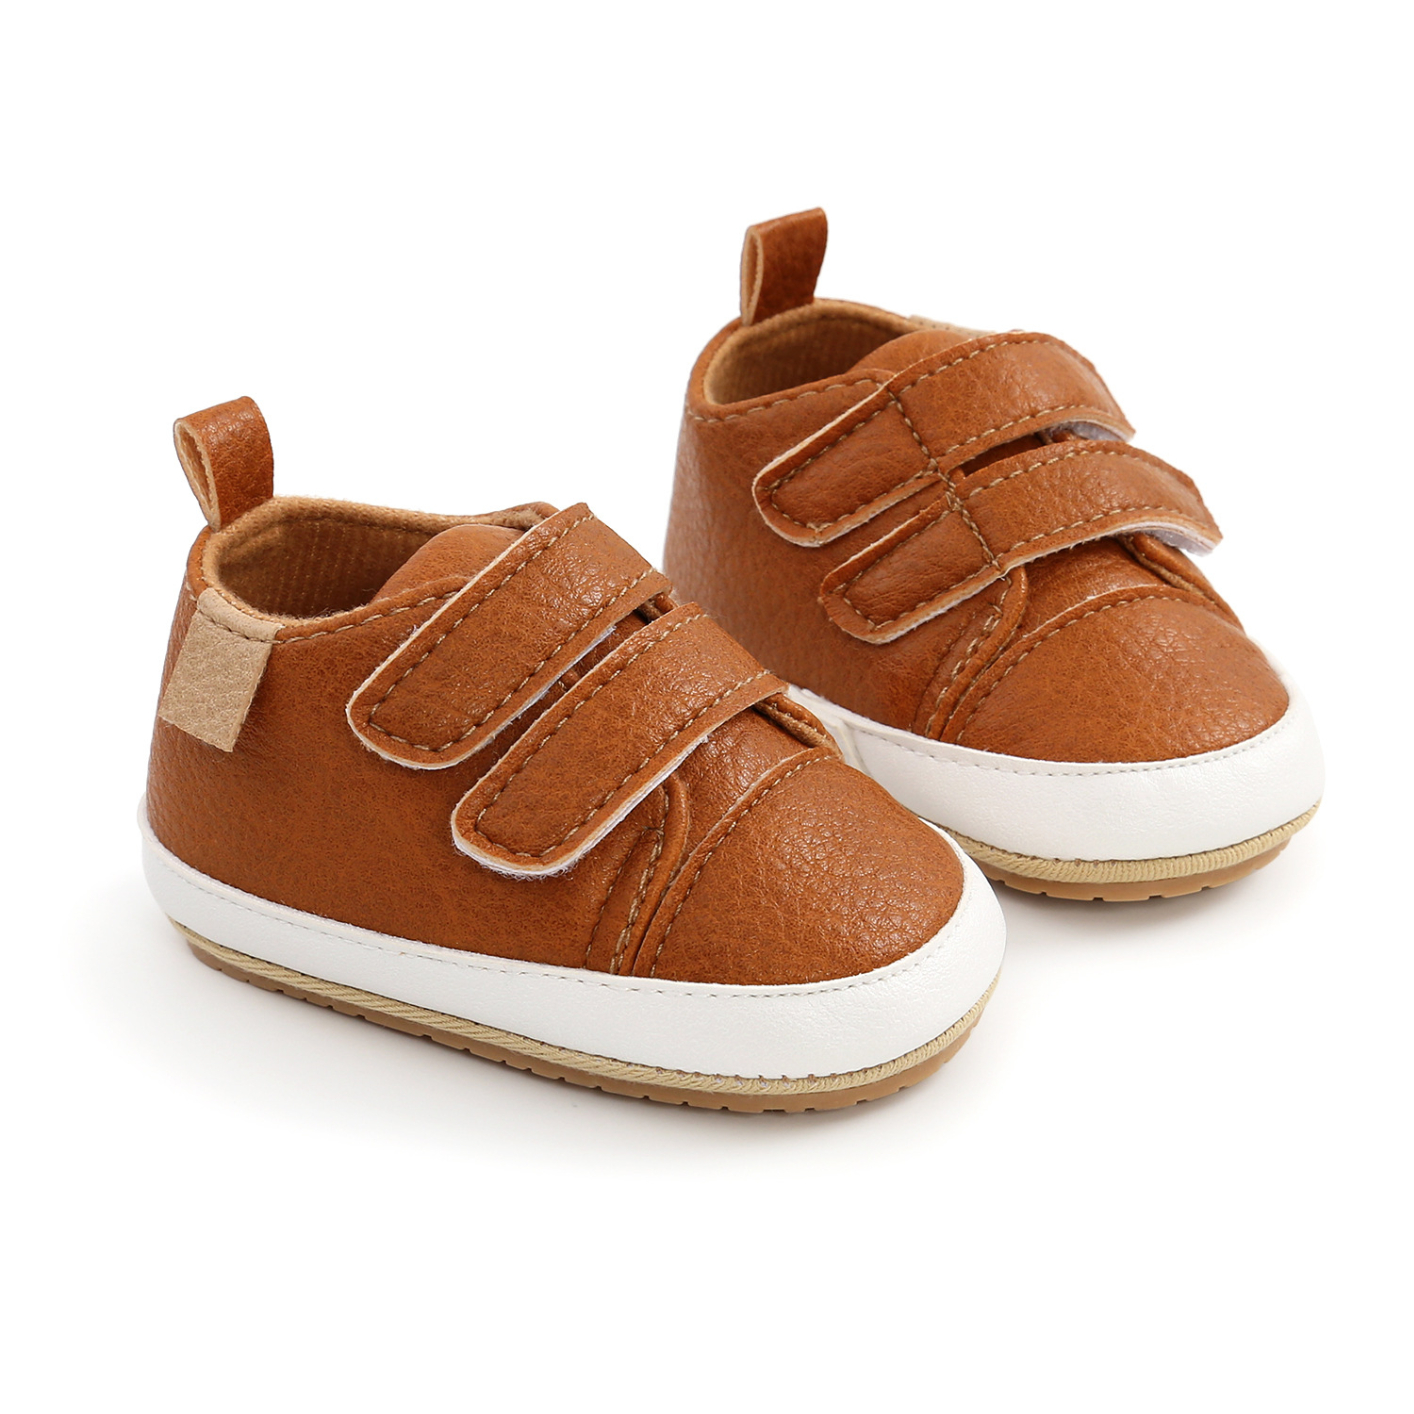 M1993 baby toddler shoes soft rubber sole Casual shoes for boys and girls